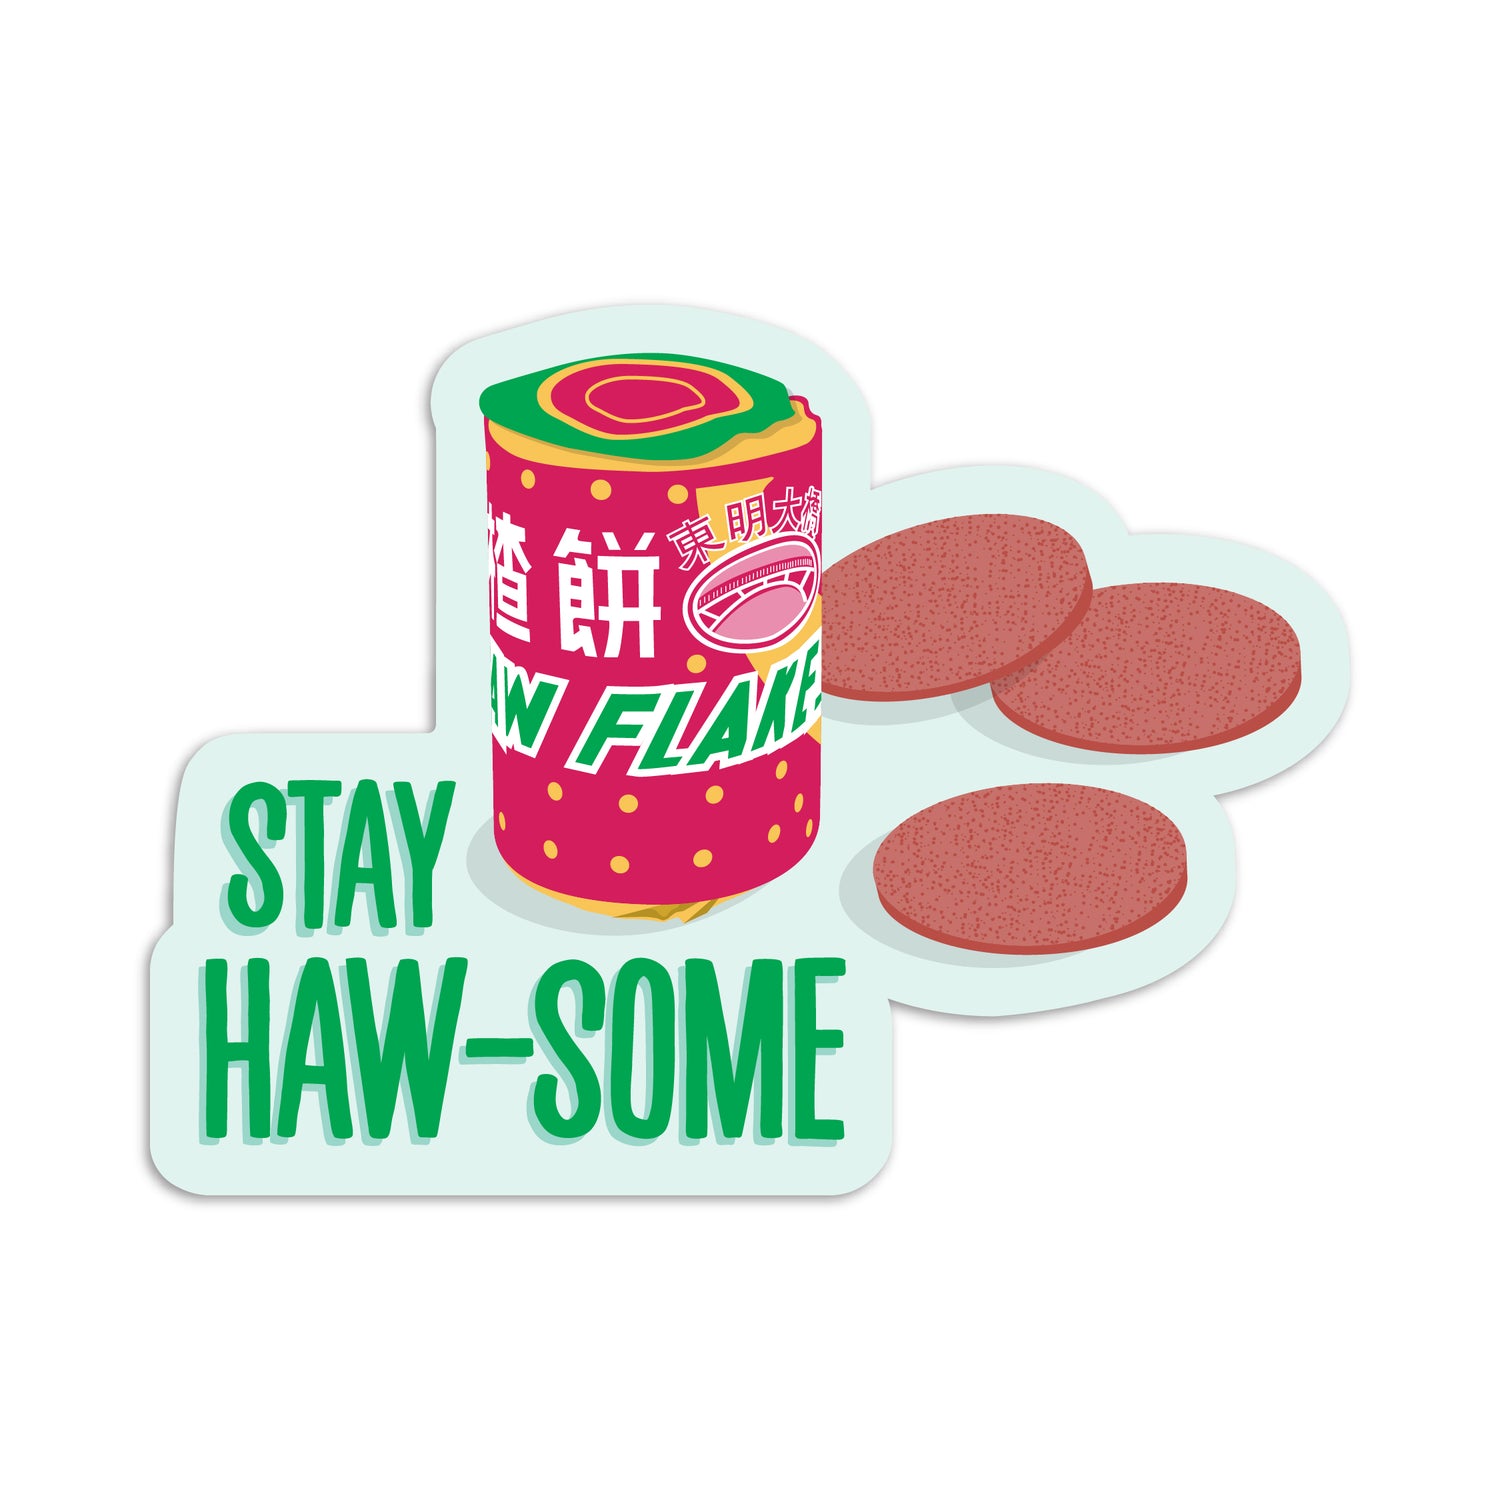 Stay haw-some Haw flakes vinyl sticker by I&